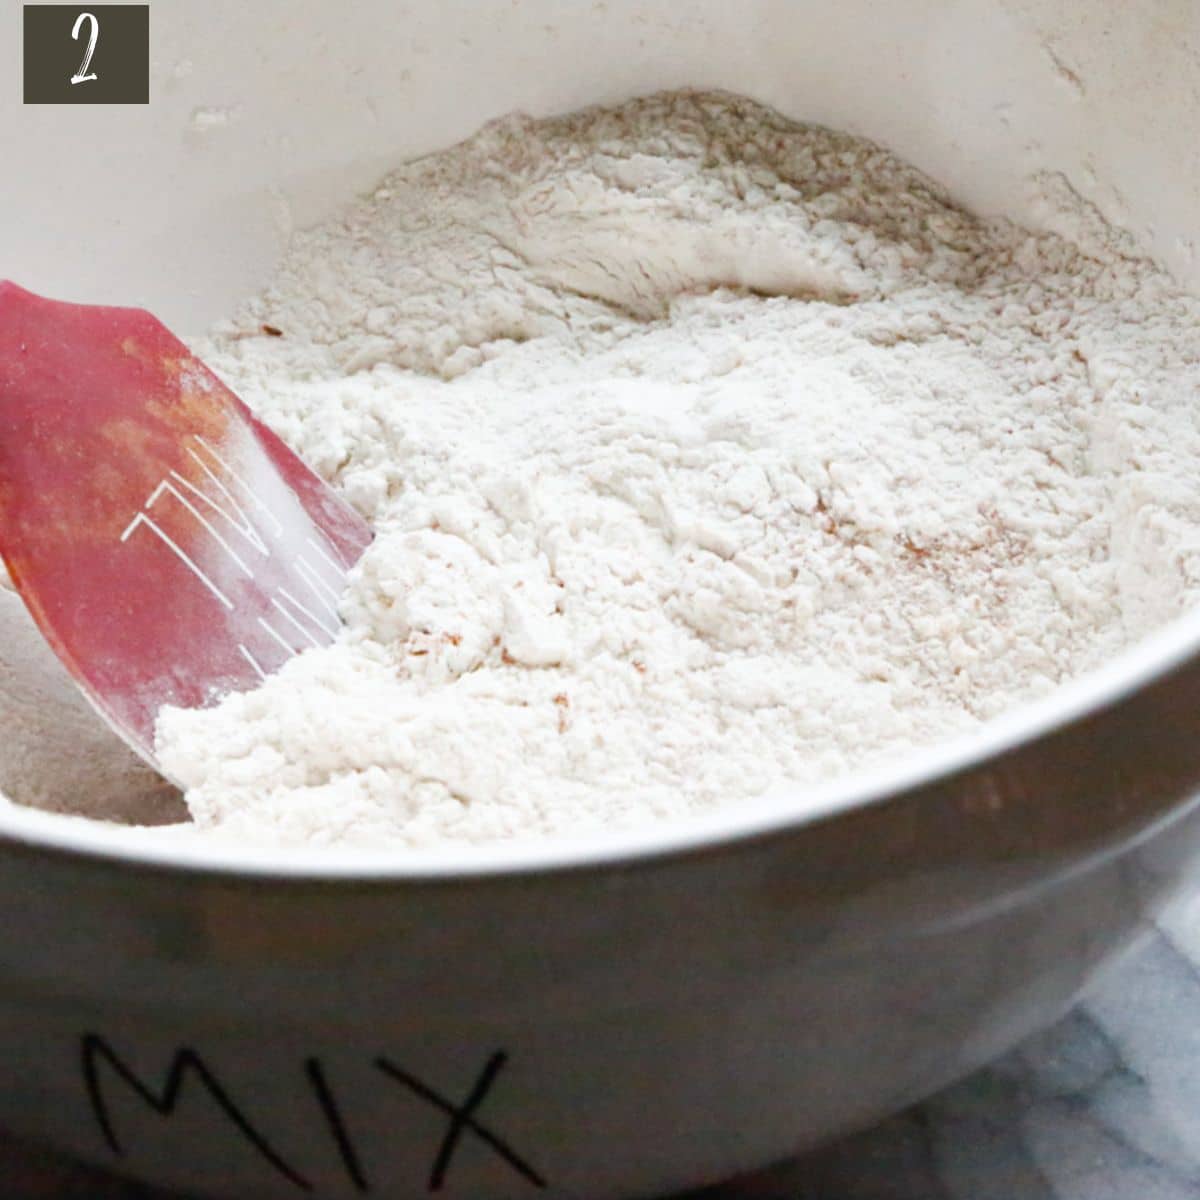 In a medium mixing bowl, add the flour, cinnamon, baking powder, baking soda, ginger, pumpkin spice, and turmeric and combine.